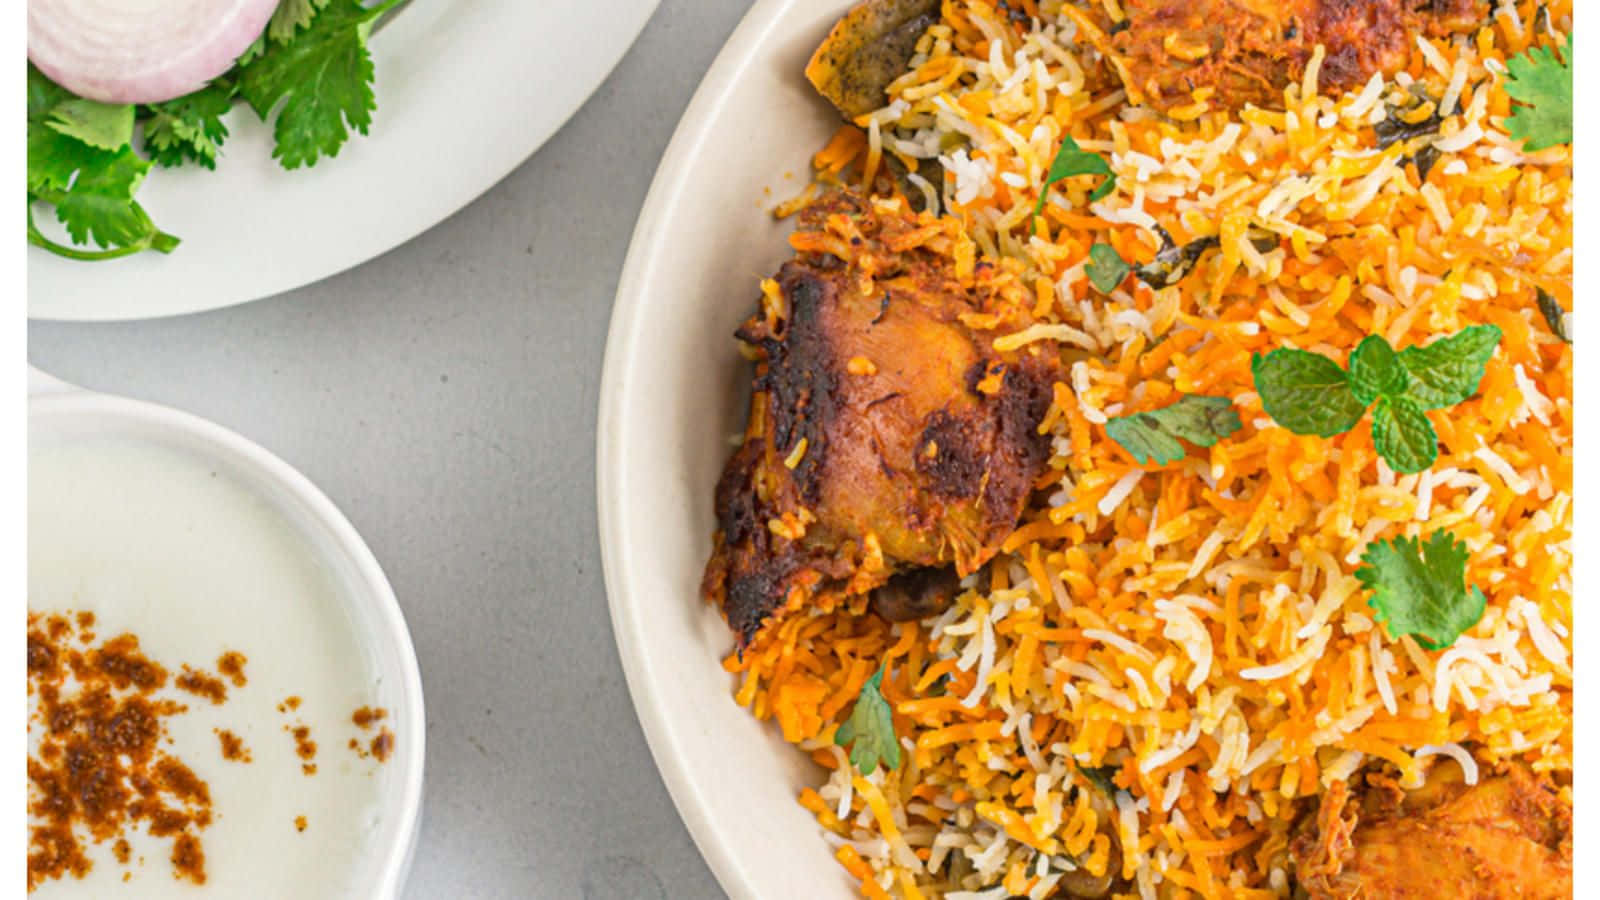 Delicious and Flavorful Biryani Served in a Bowl with Raita and Salad